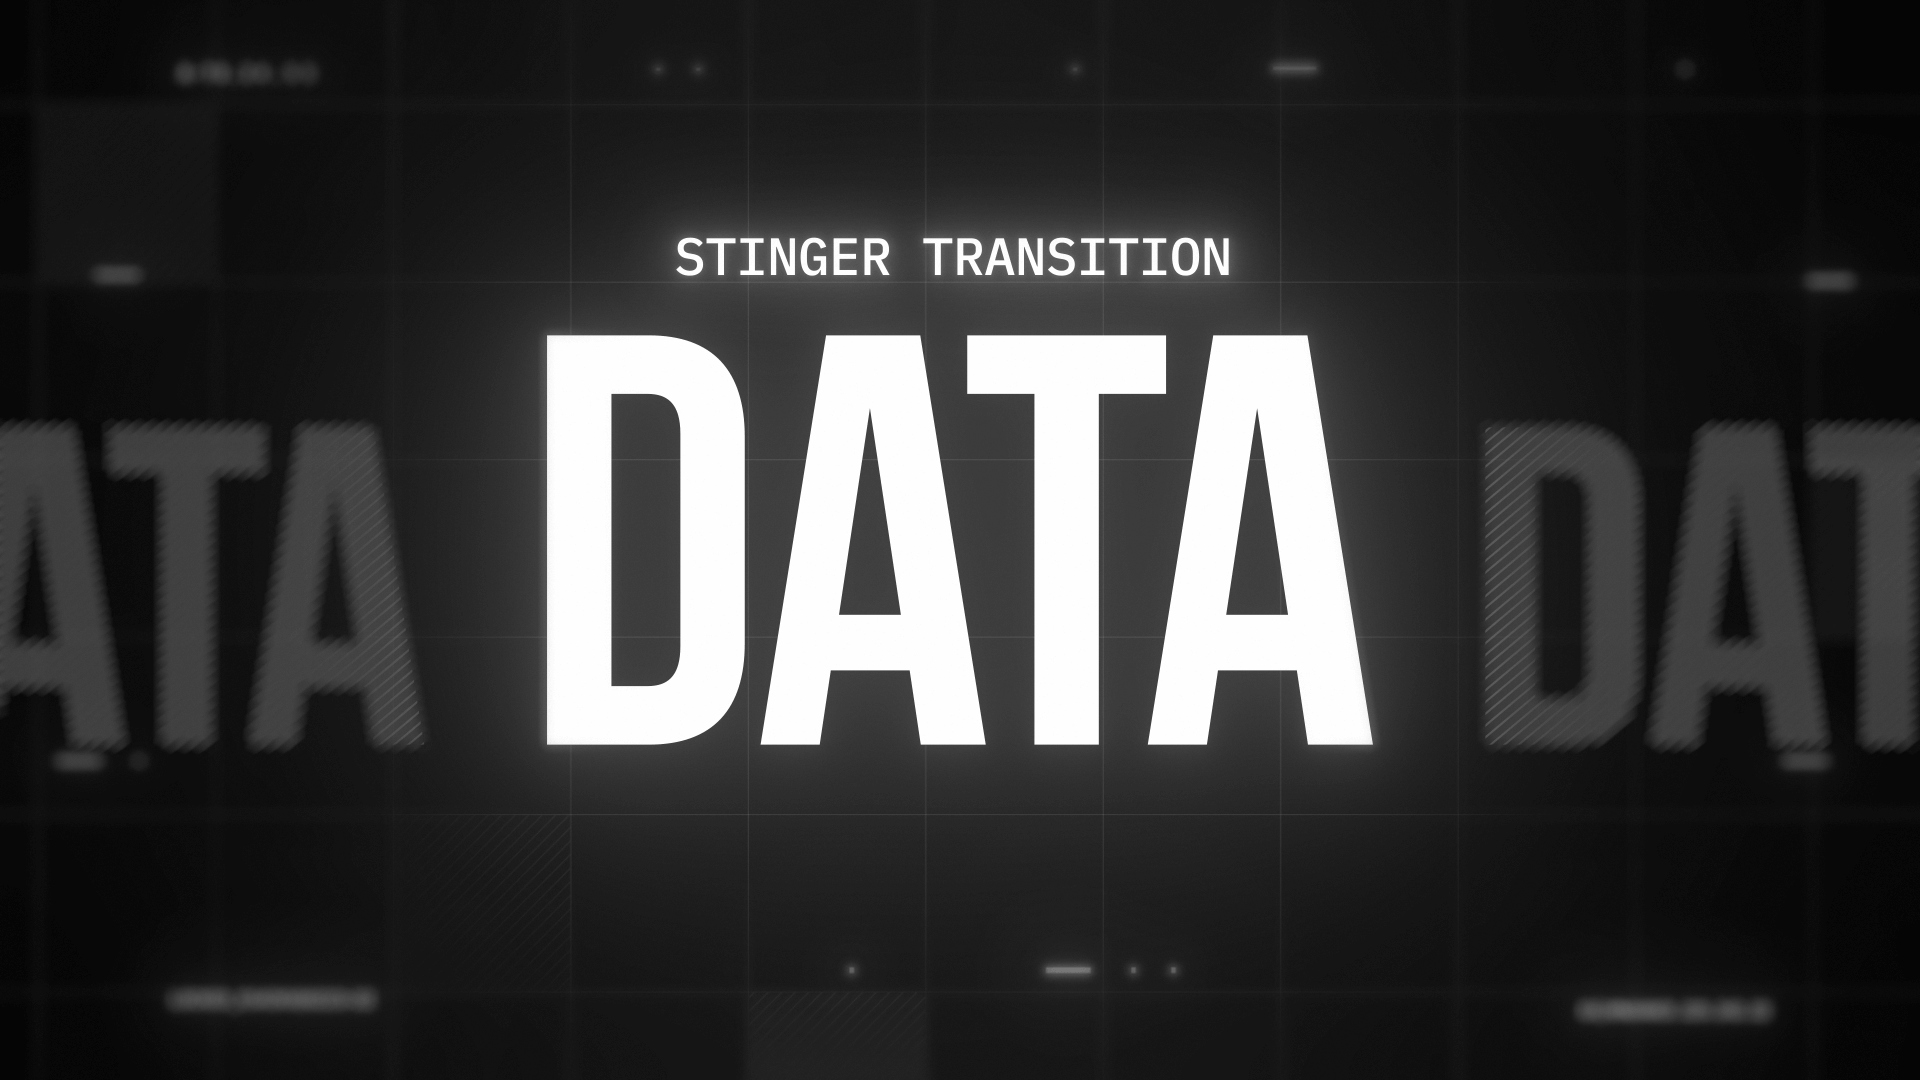 Data - Stinger Transition for Twitch, Youtube and Facebook